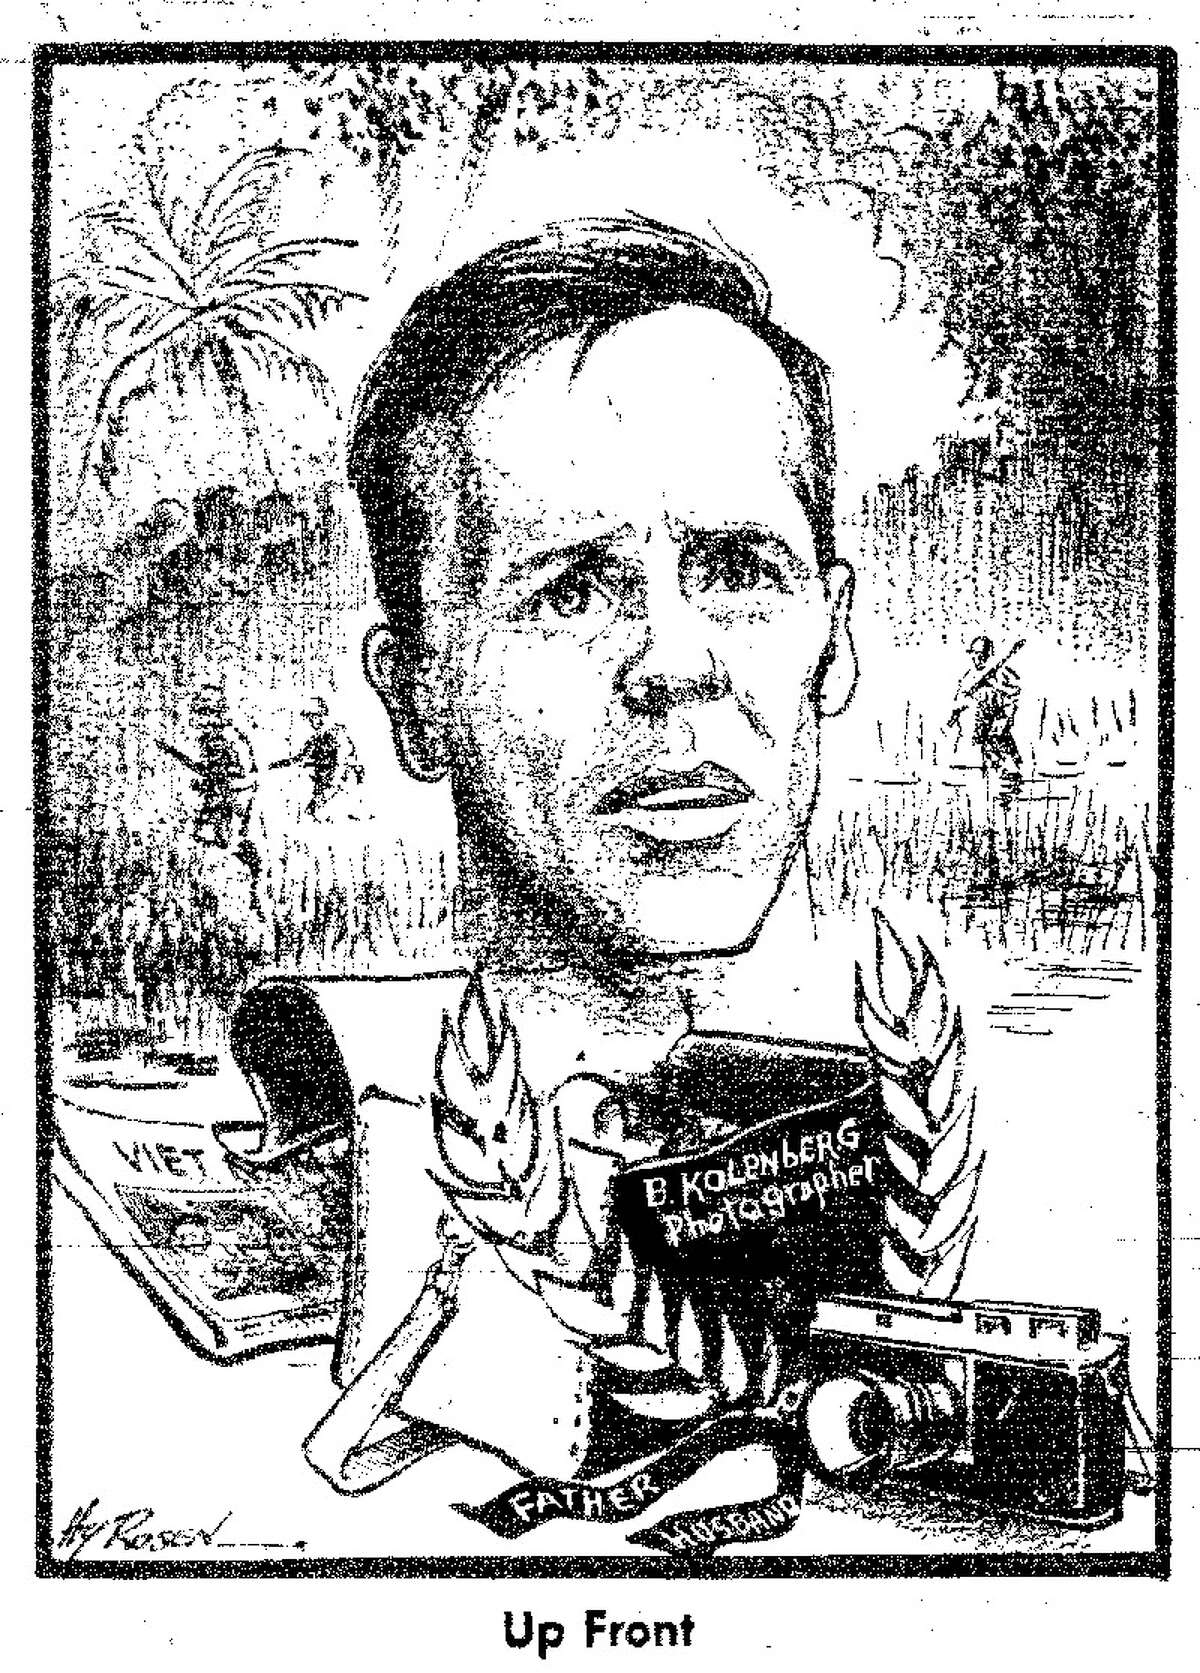 Award-winning Times Union photojournalist Bernie Kolenberg is remembered in a cartoon by Times Union editorial cartoonist Hy Rosen on Oct. 4, 1965, days after Kolenberg's death while working for the Associated Press in Vietnam.